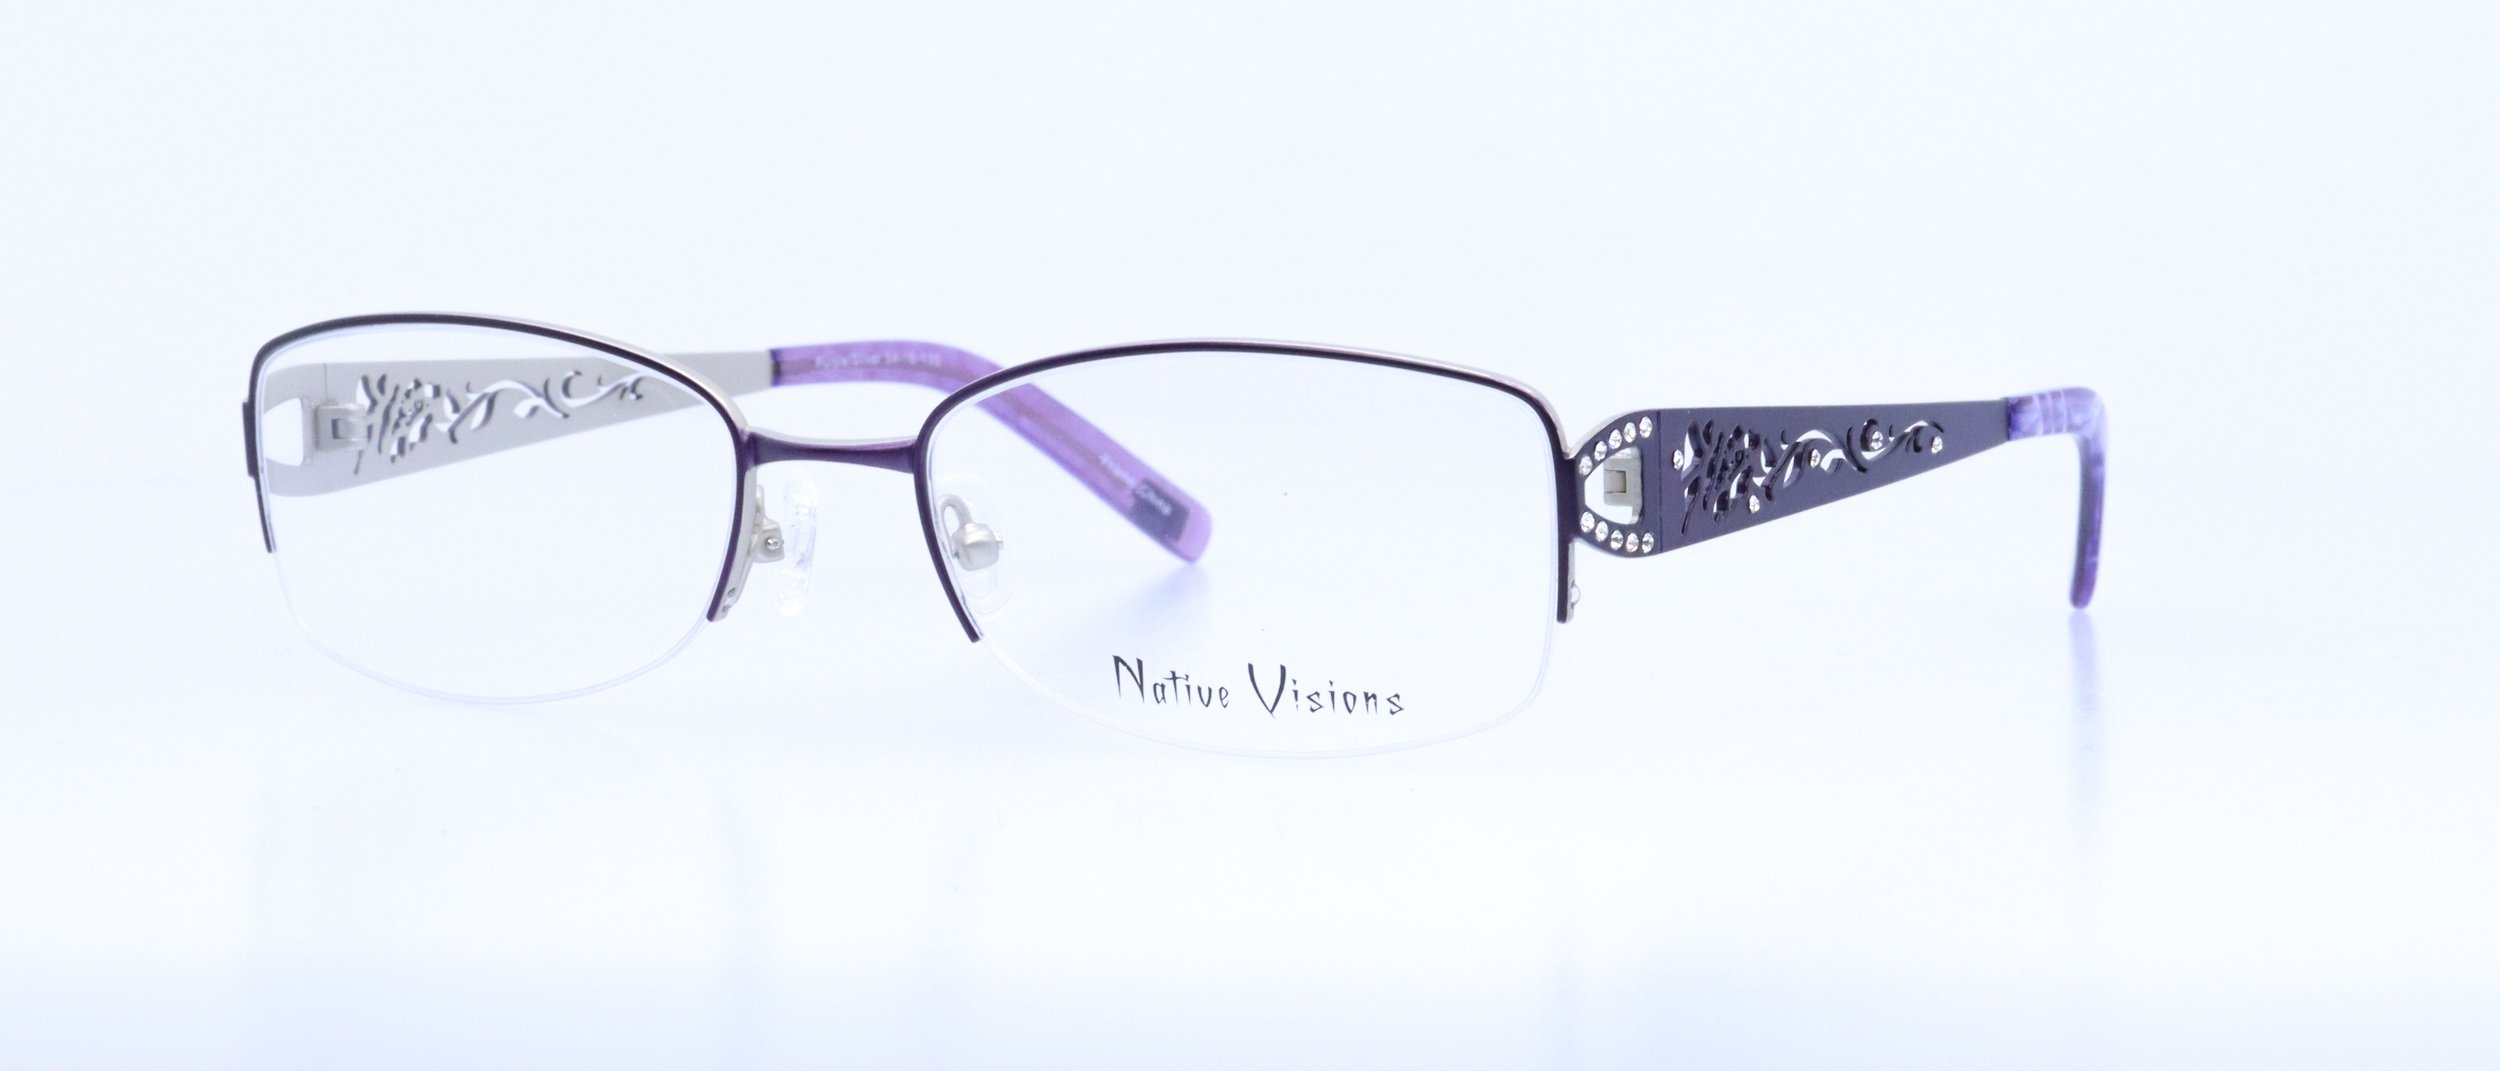  Butterfly by Virgil "Smoker" Marchand:  54-18-135, Available in Rose Gold, Brown/Turquoise, or Purple/Silver 